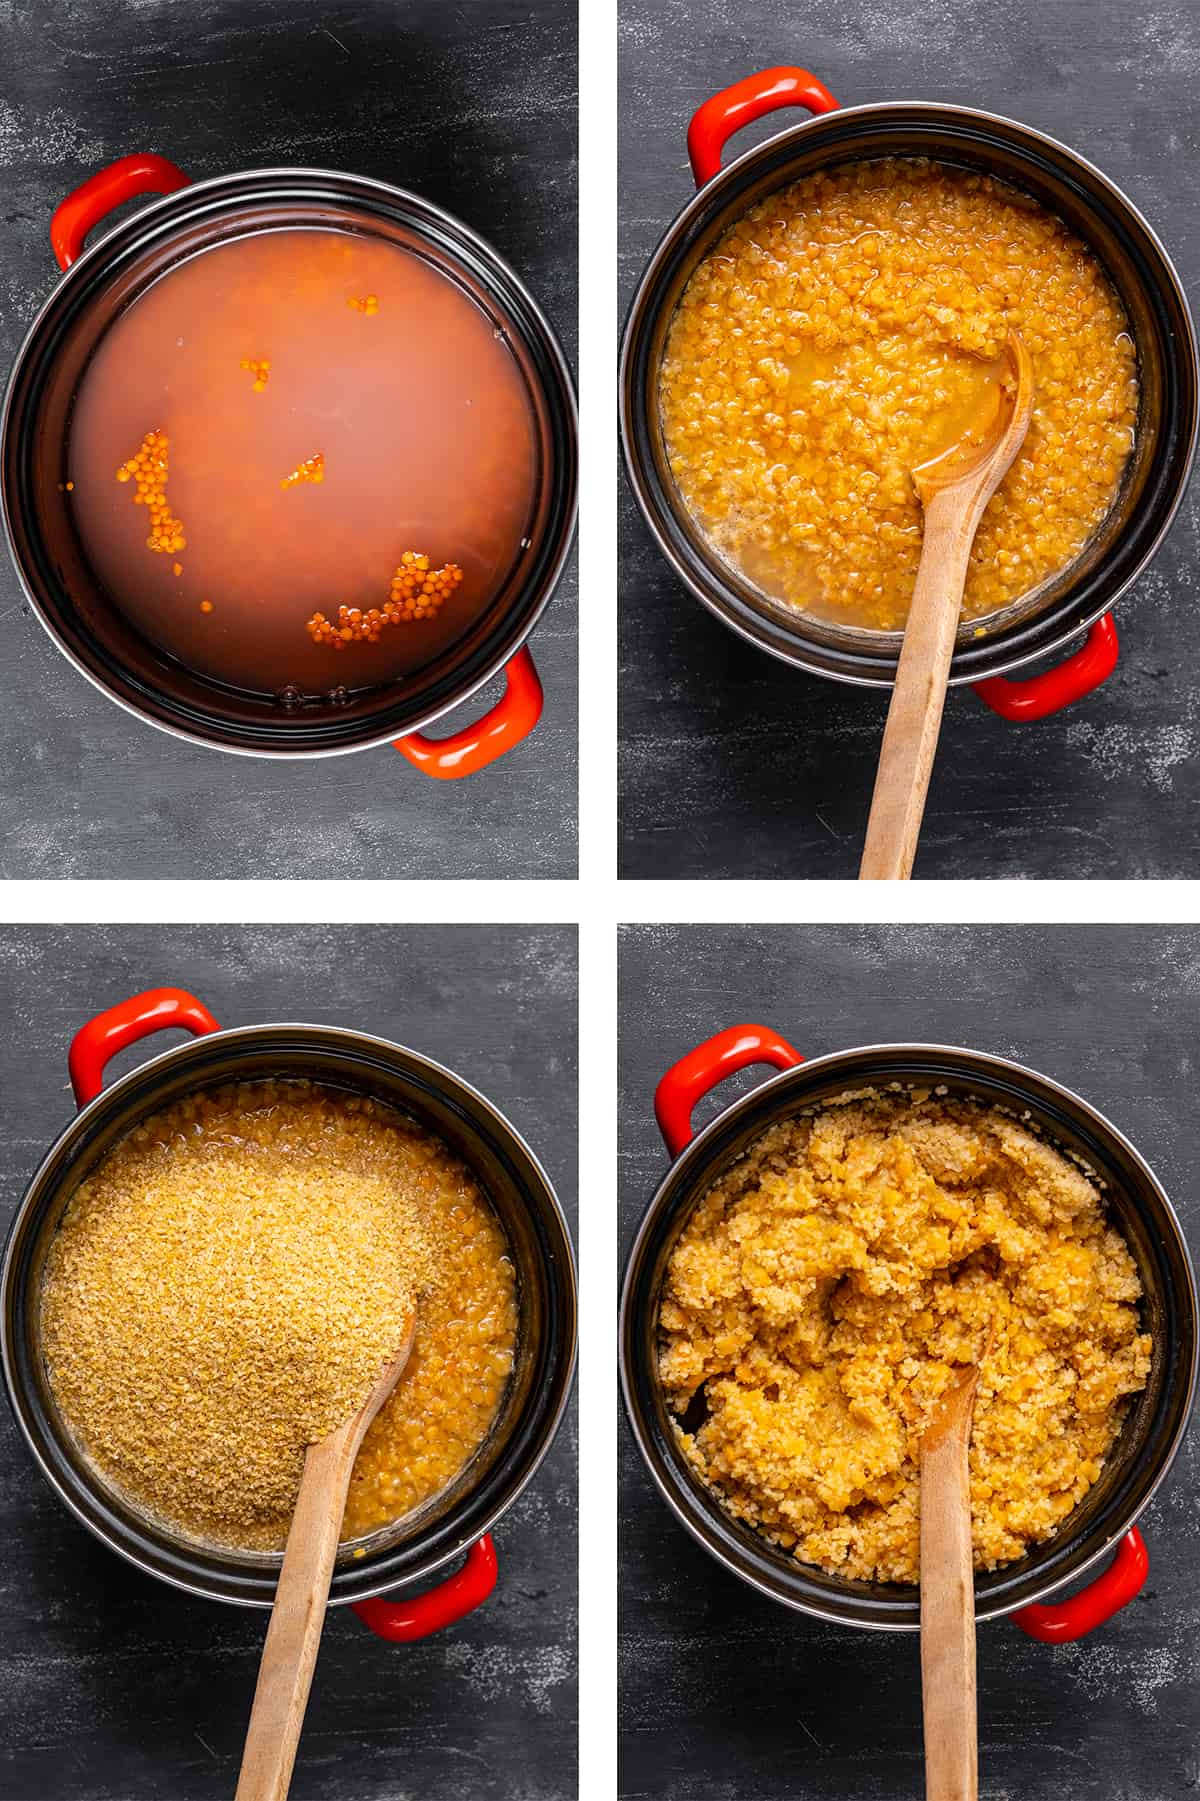 A collage of four pictures showing the steps of cooking red lentils and bulgur in a pot.